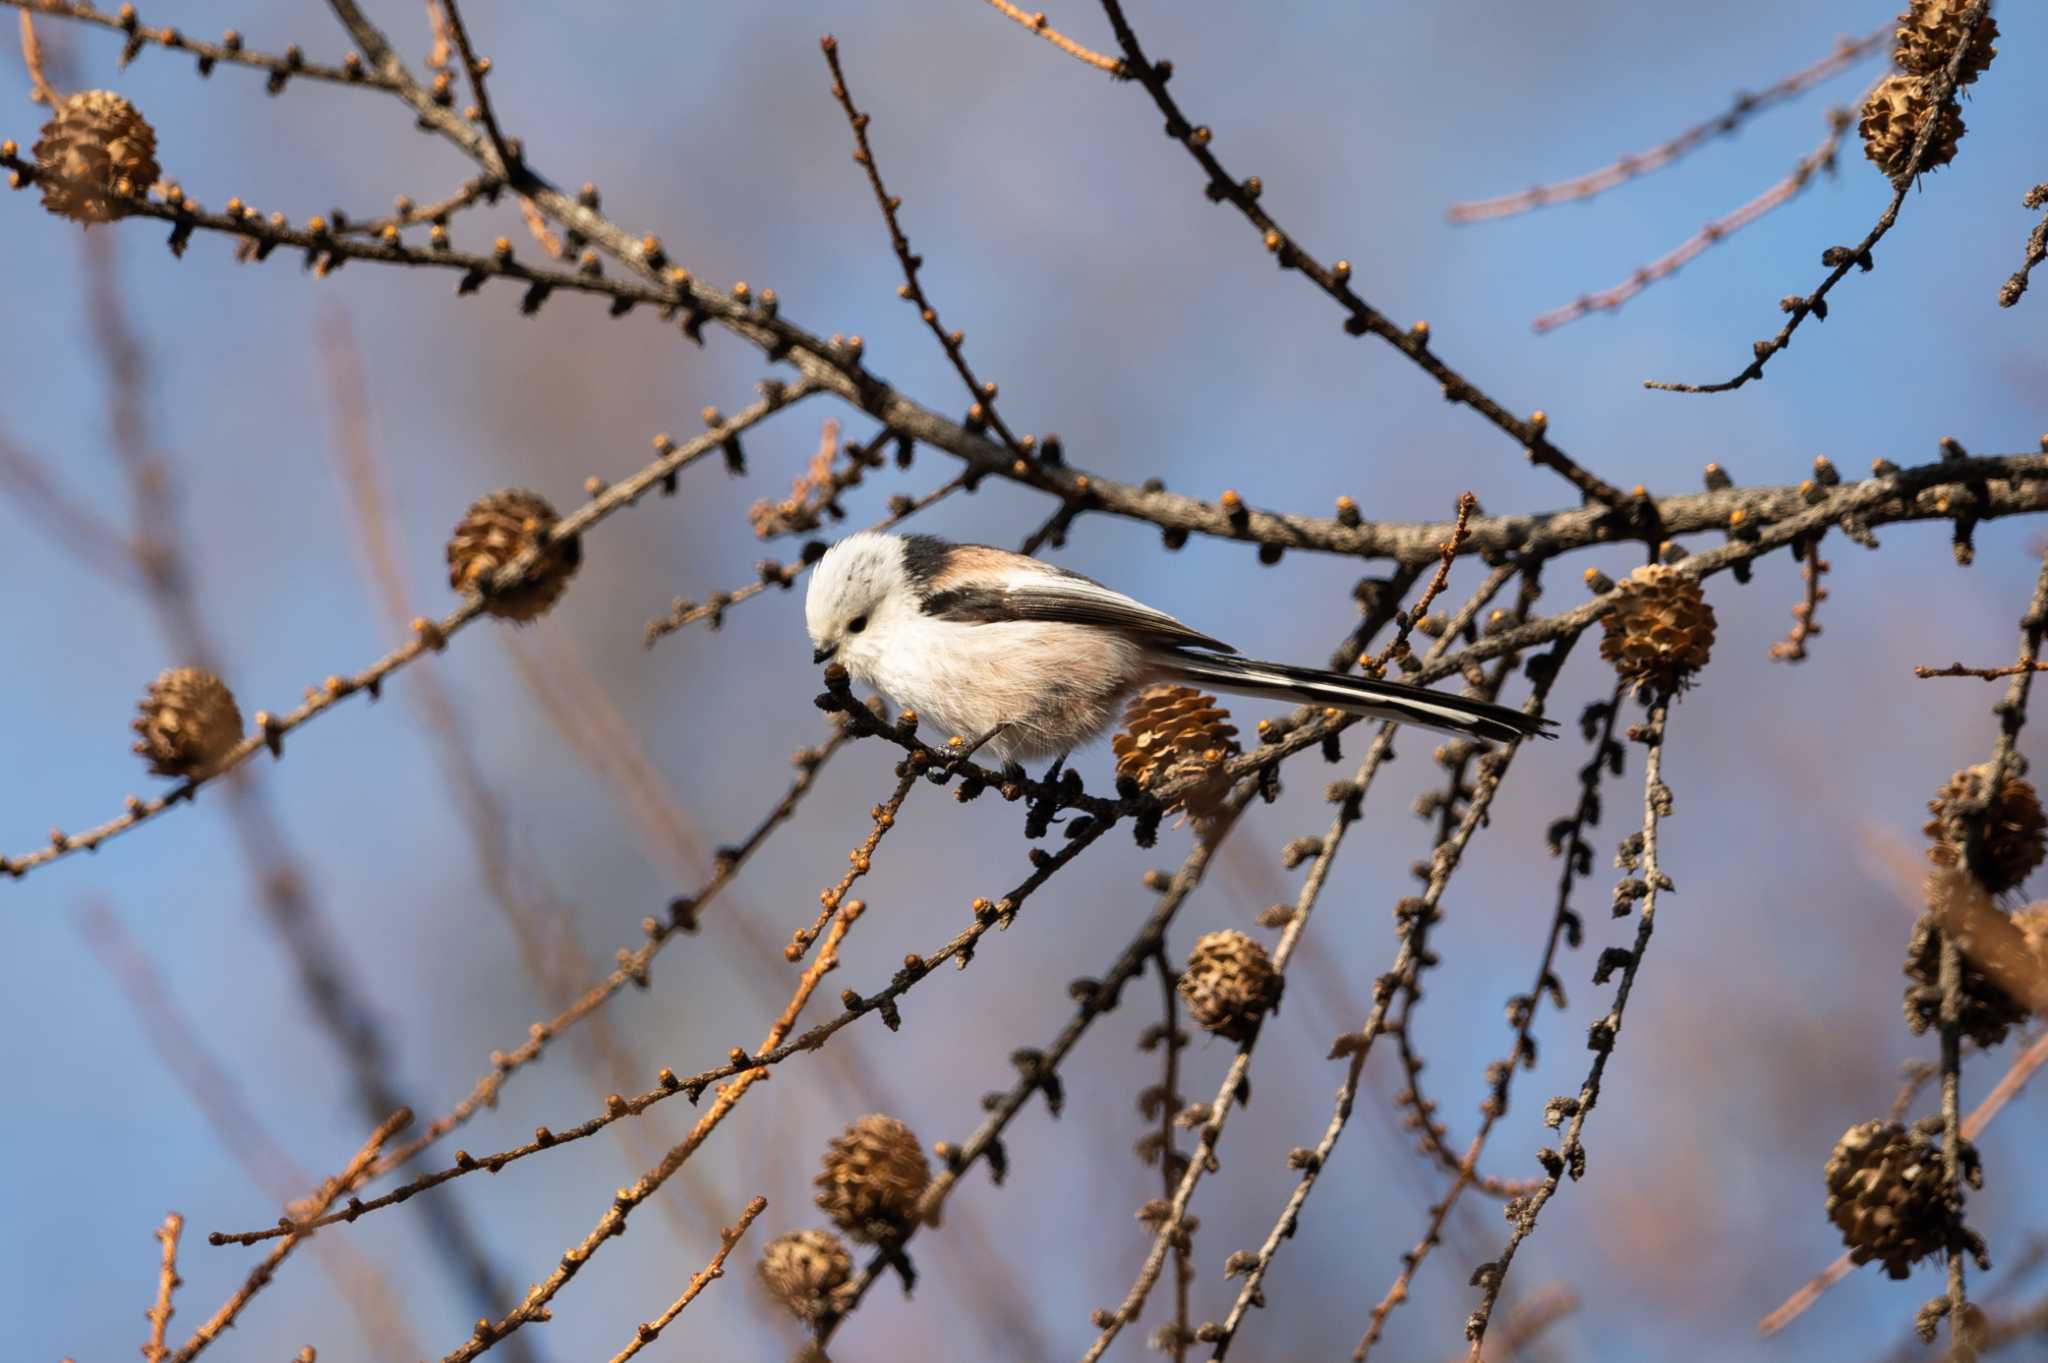 Photo of Long-tailed tit(japonicus) at 月寒公園 by North* Star*